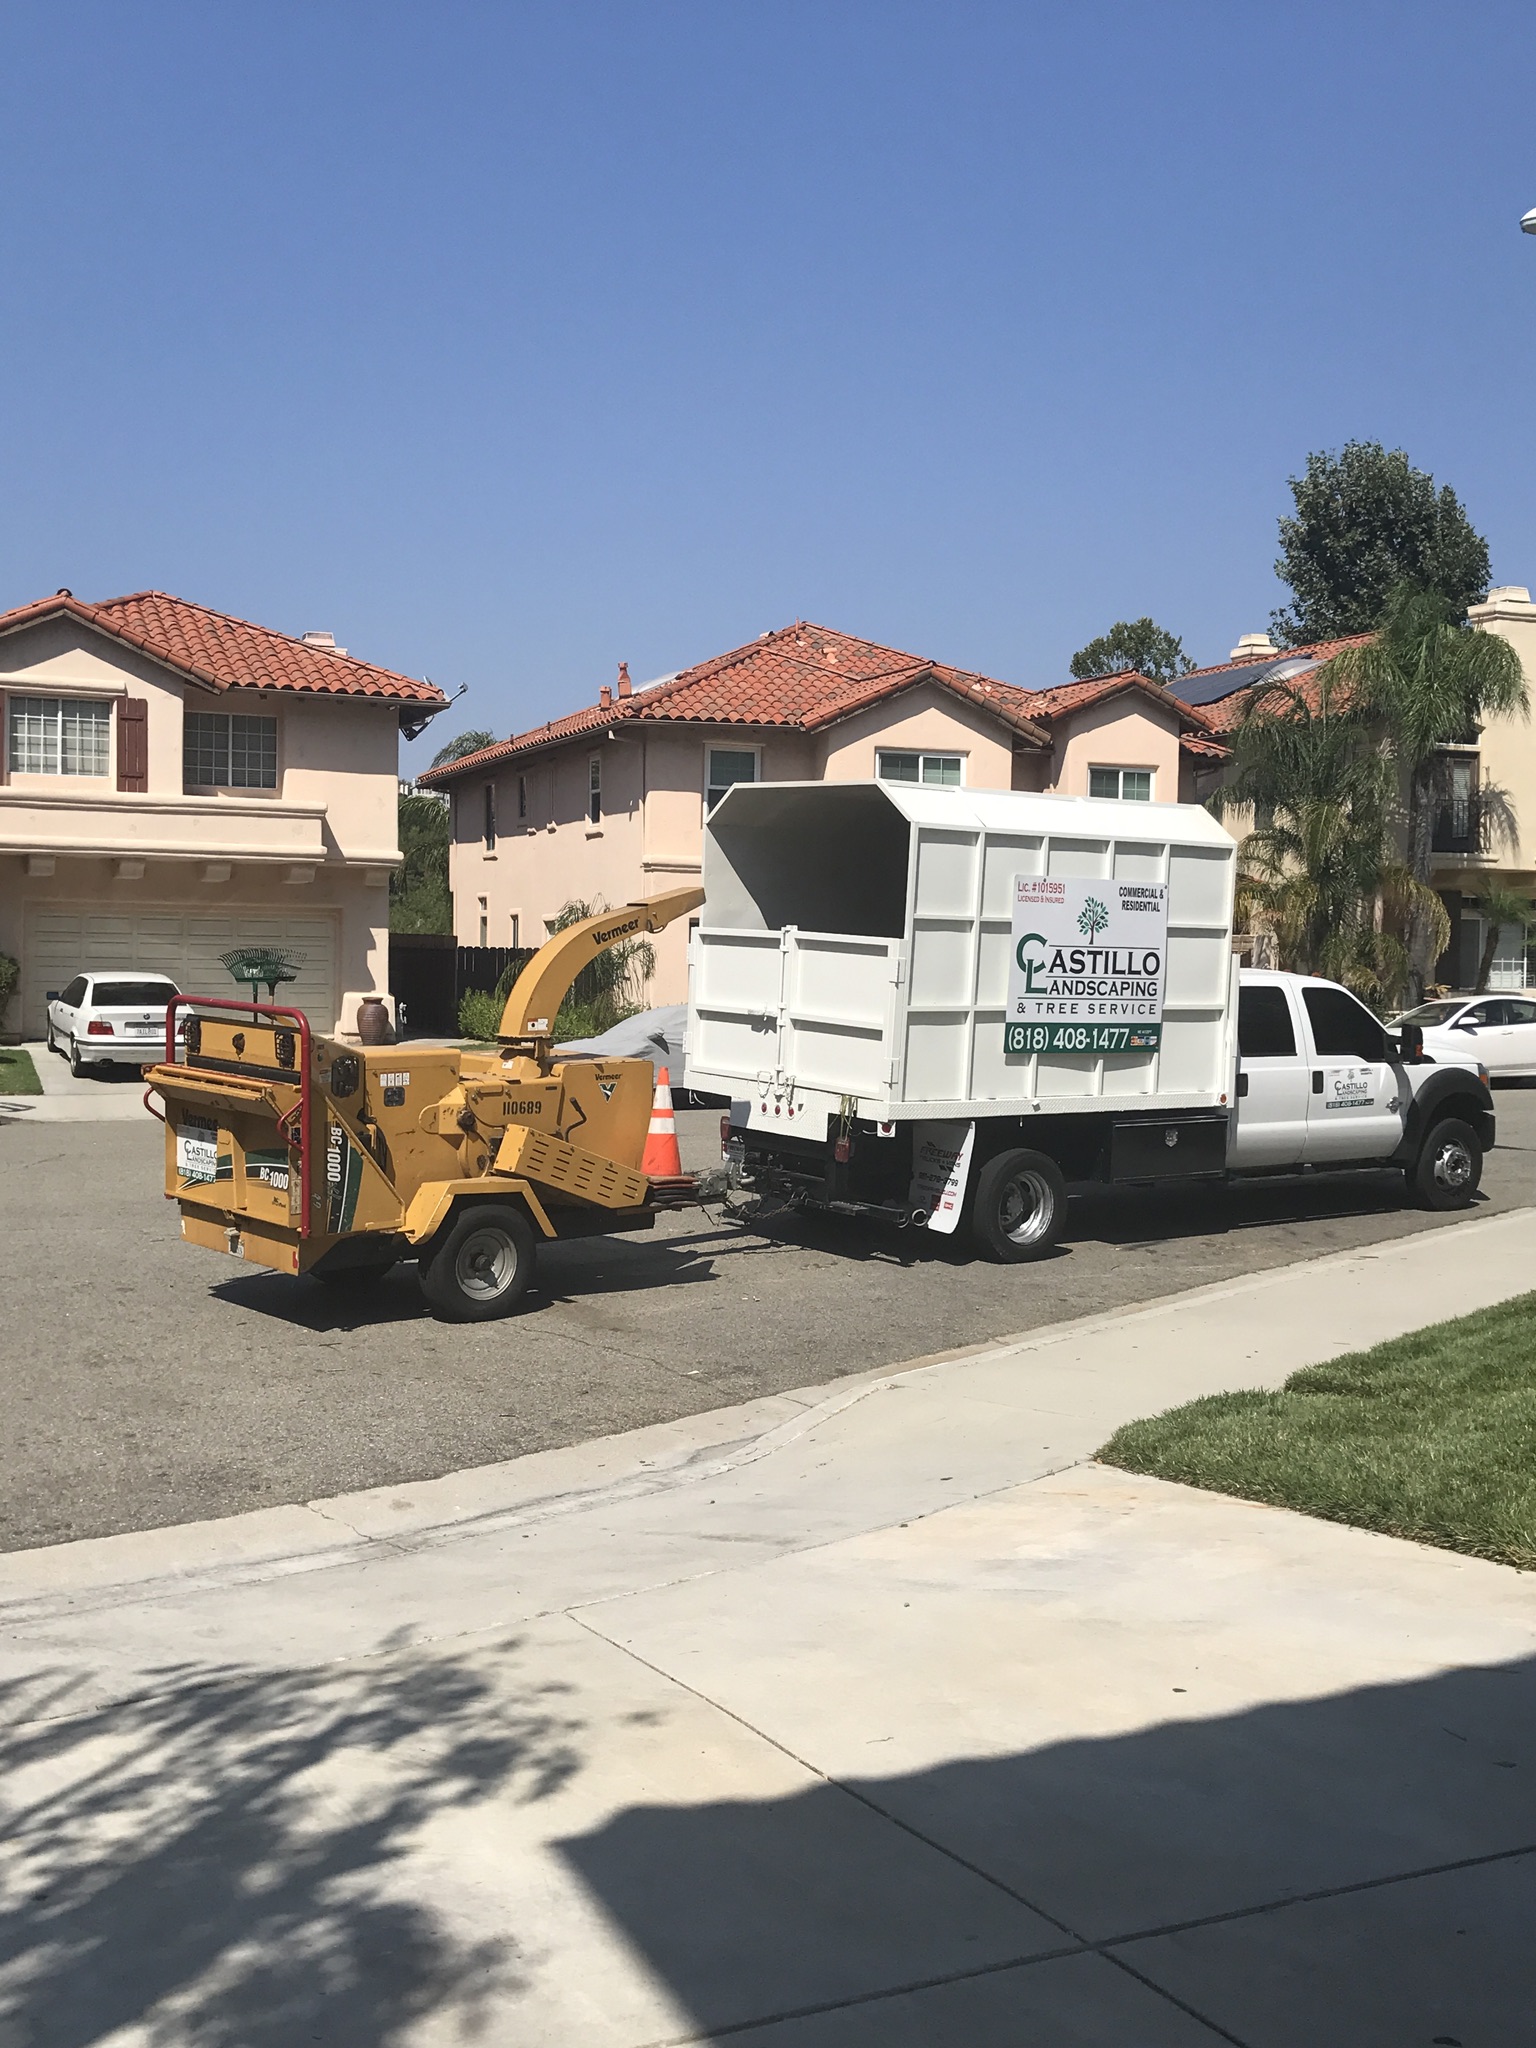 landscaping in los angeles